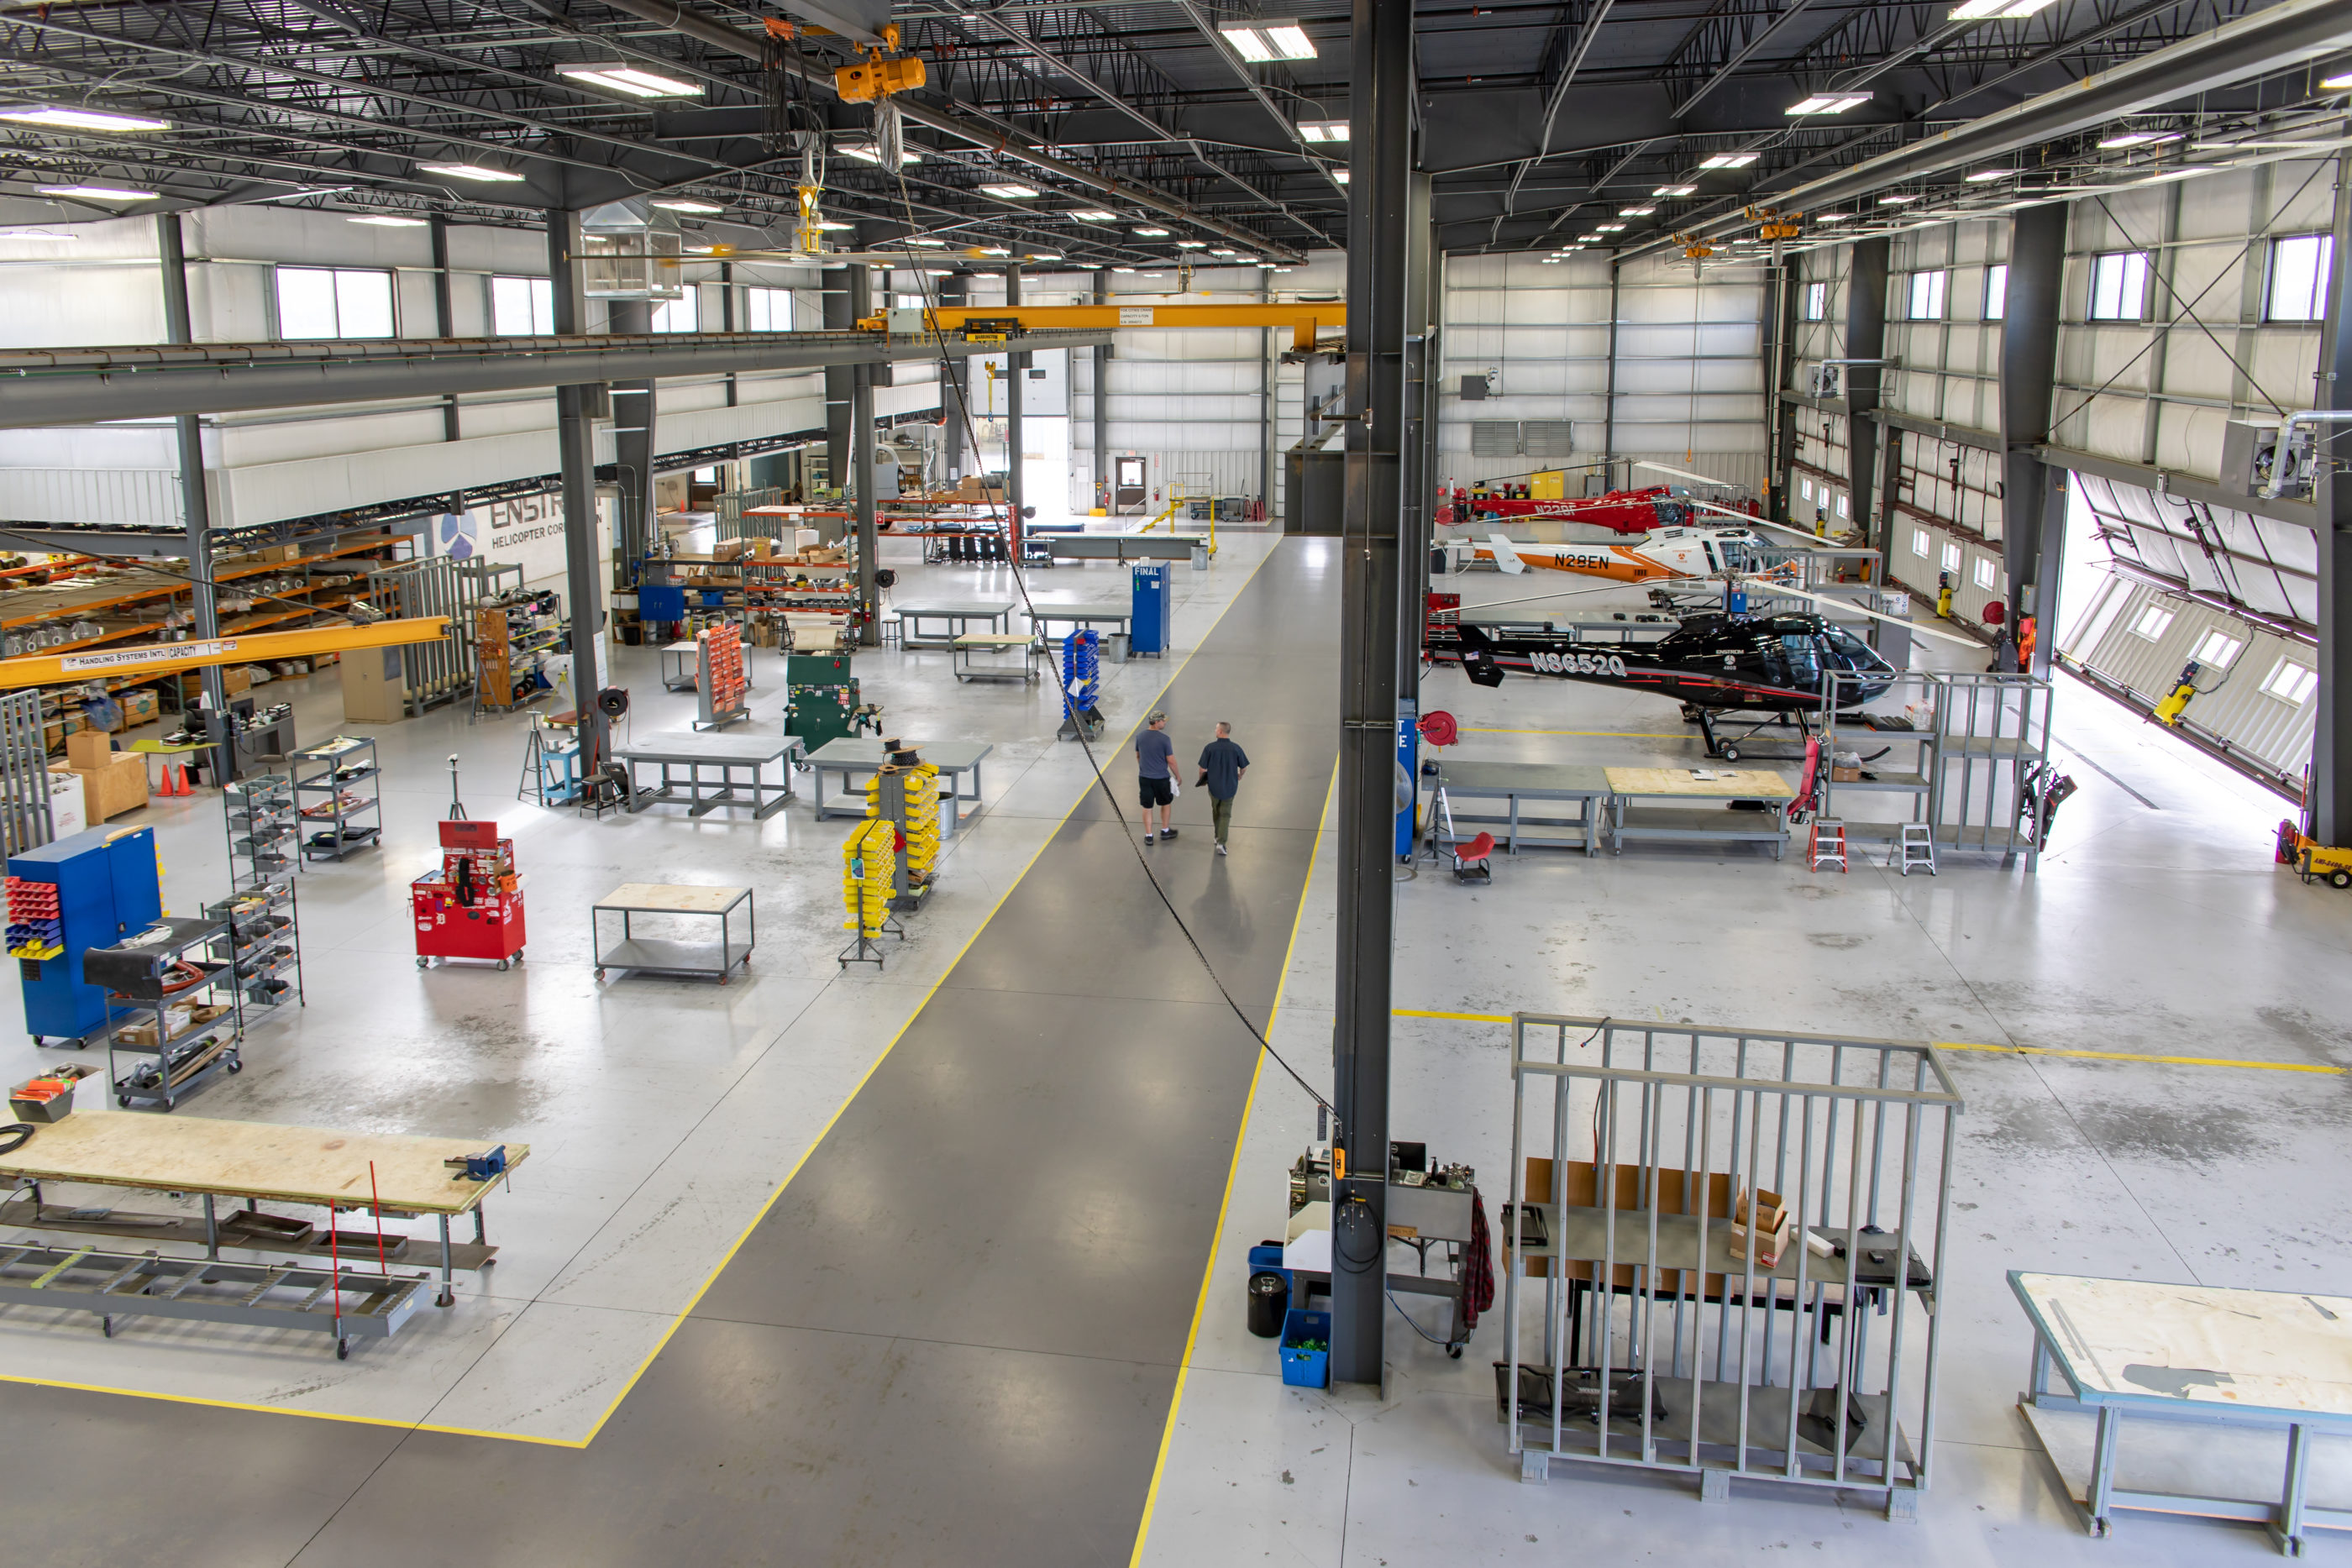 A look down the production line of Enstrom's manufacturing facility in Menominee, Michigan. Brent Bundy Photo